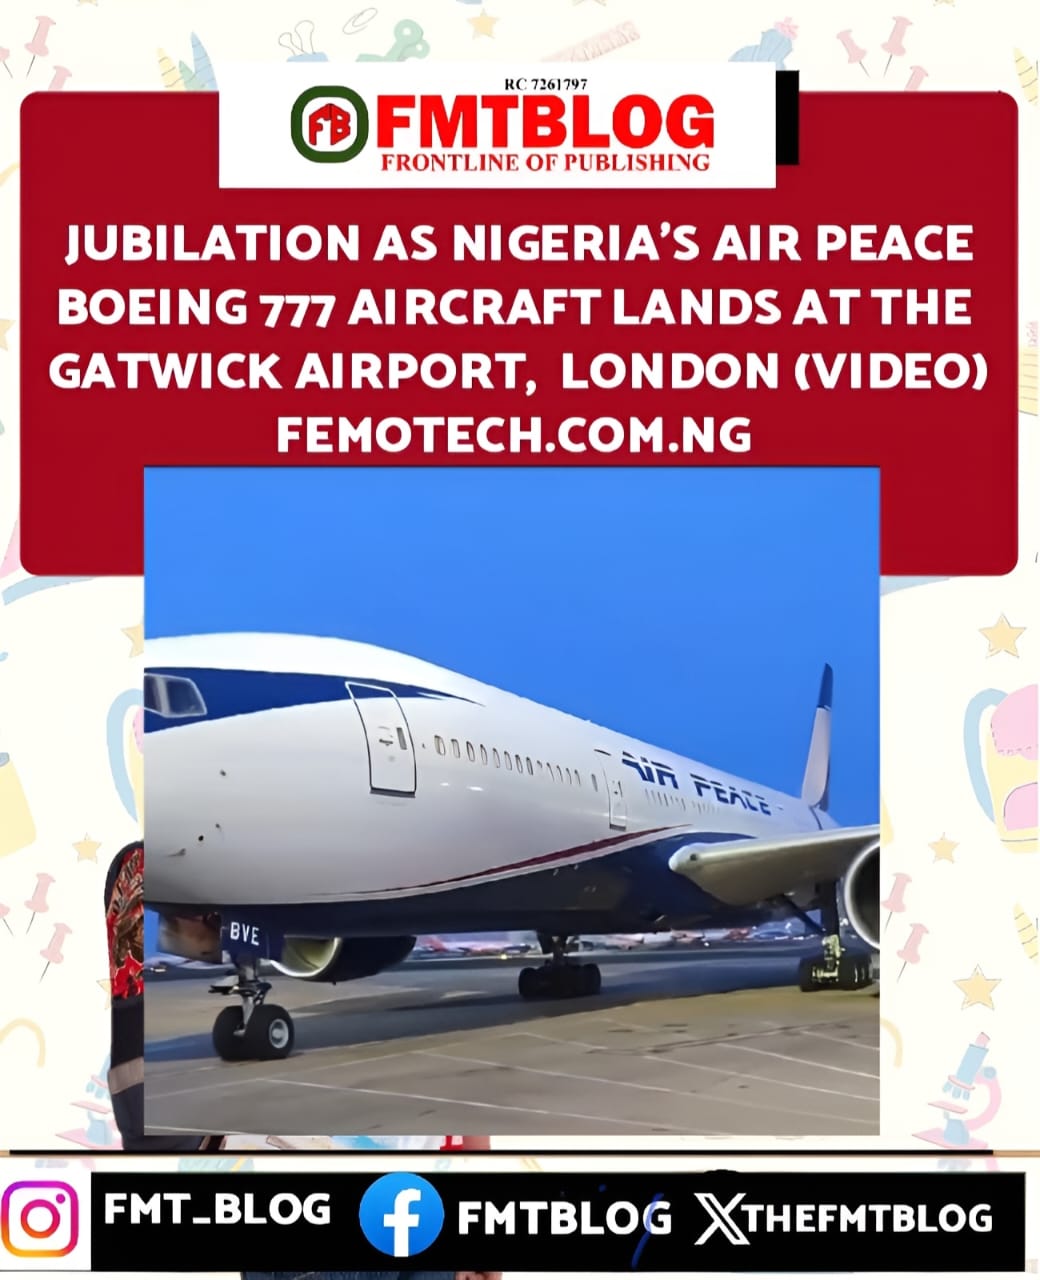 Jubilation As Nigeria’s Air Peace Boeing 777 Aircraft Lands At The Gatwick Airport, London (VIDEO)